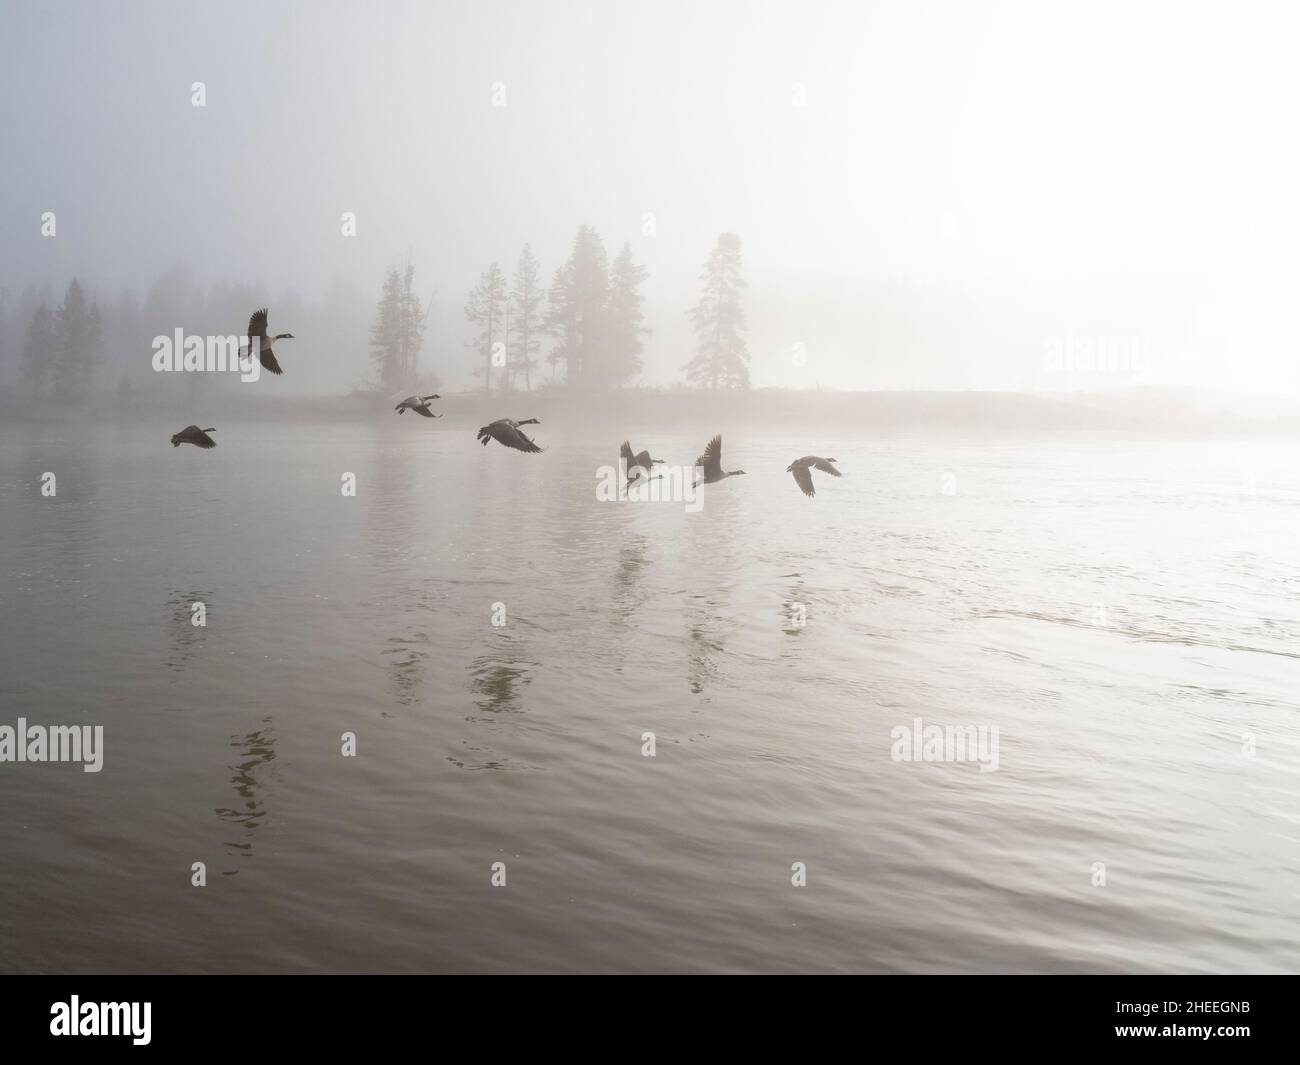 A flock of Canada geese, Branta canadensis, in flight in the fog in Yellowstone National Park, Wyoming. Stock Photo